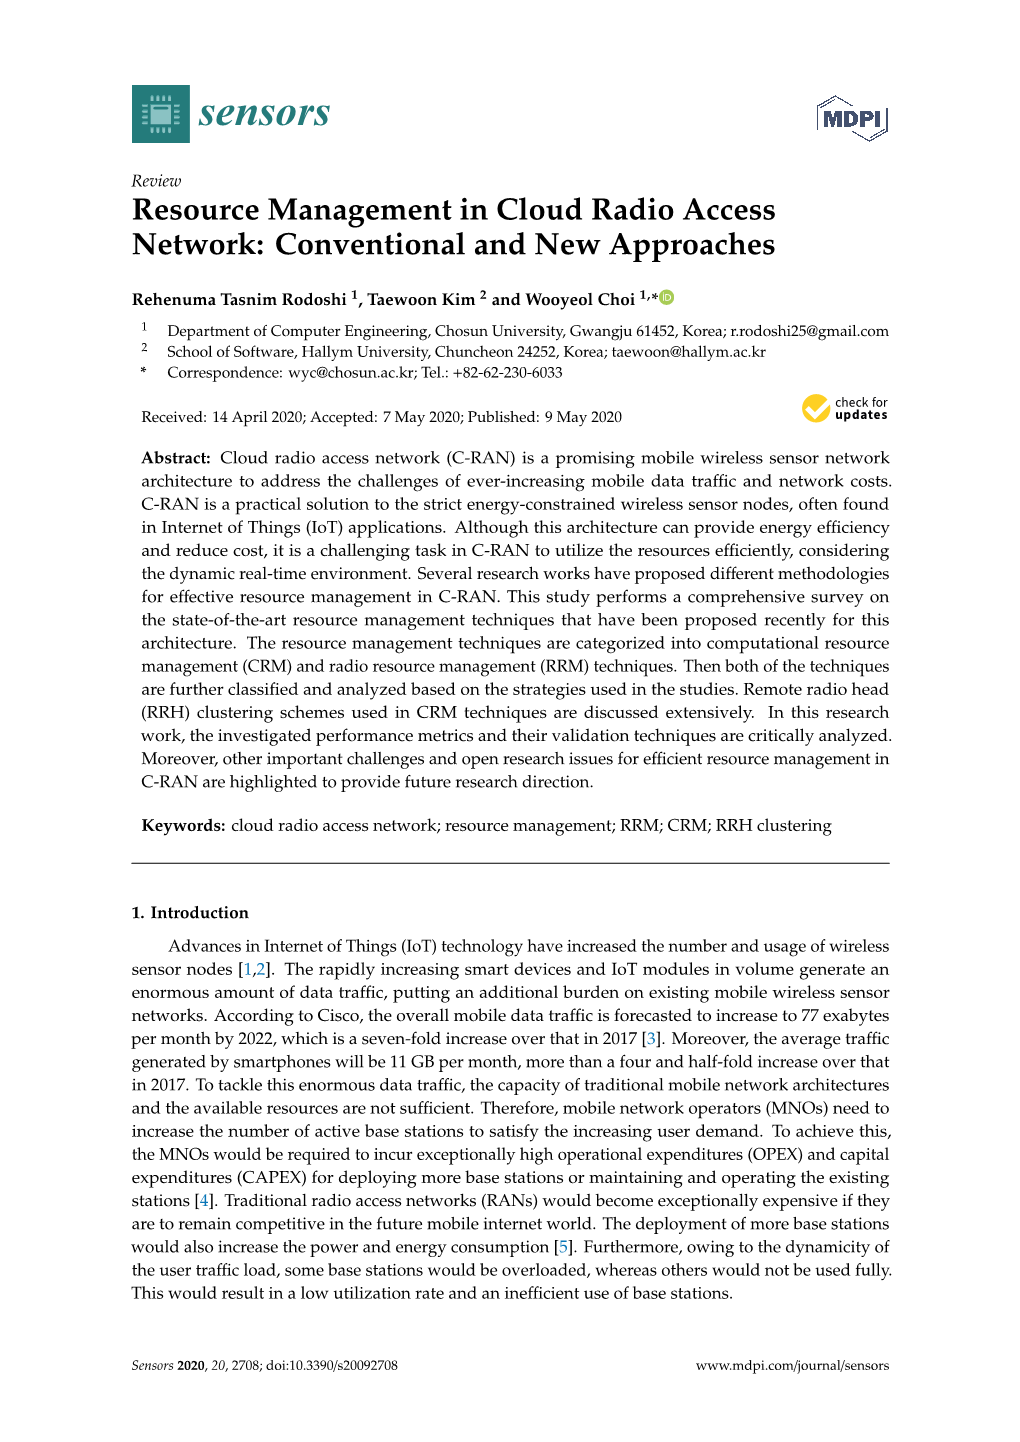 Resource Management in Cloud Radio Access Network: Conventional and New Approaches